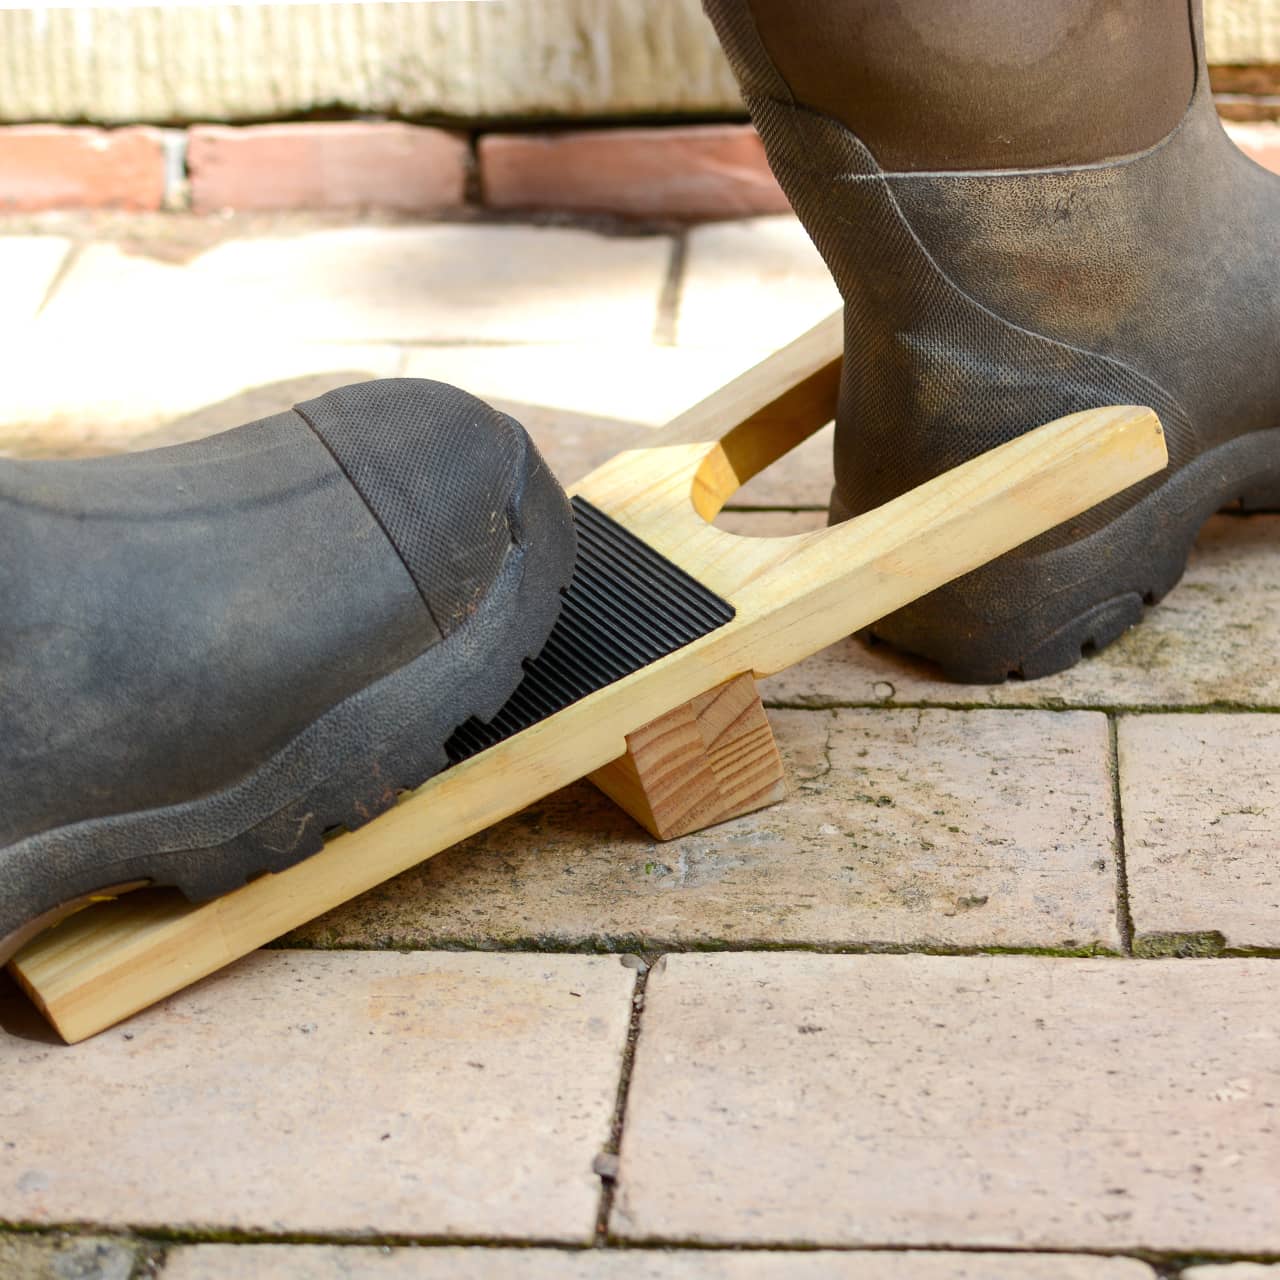 Heavy Duty Wooden Boot Jack / Remover and Mud Scraper